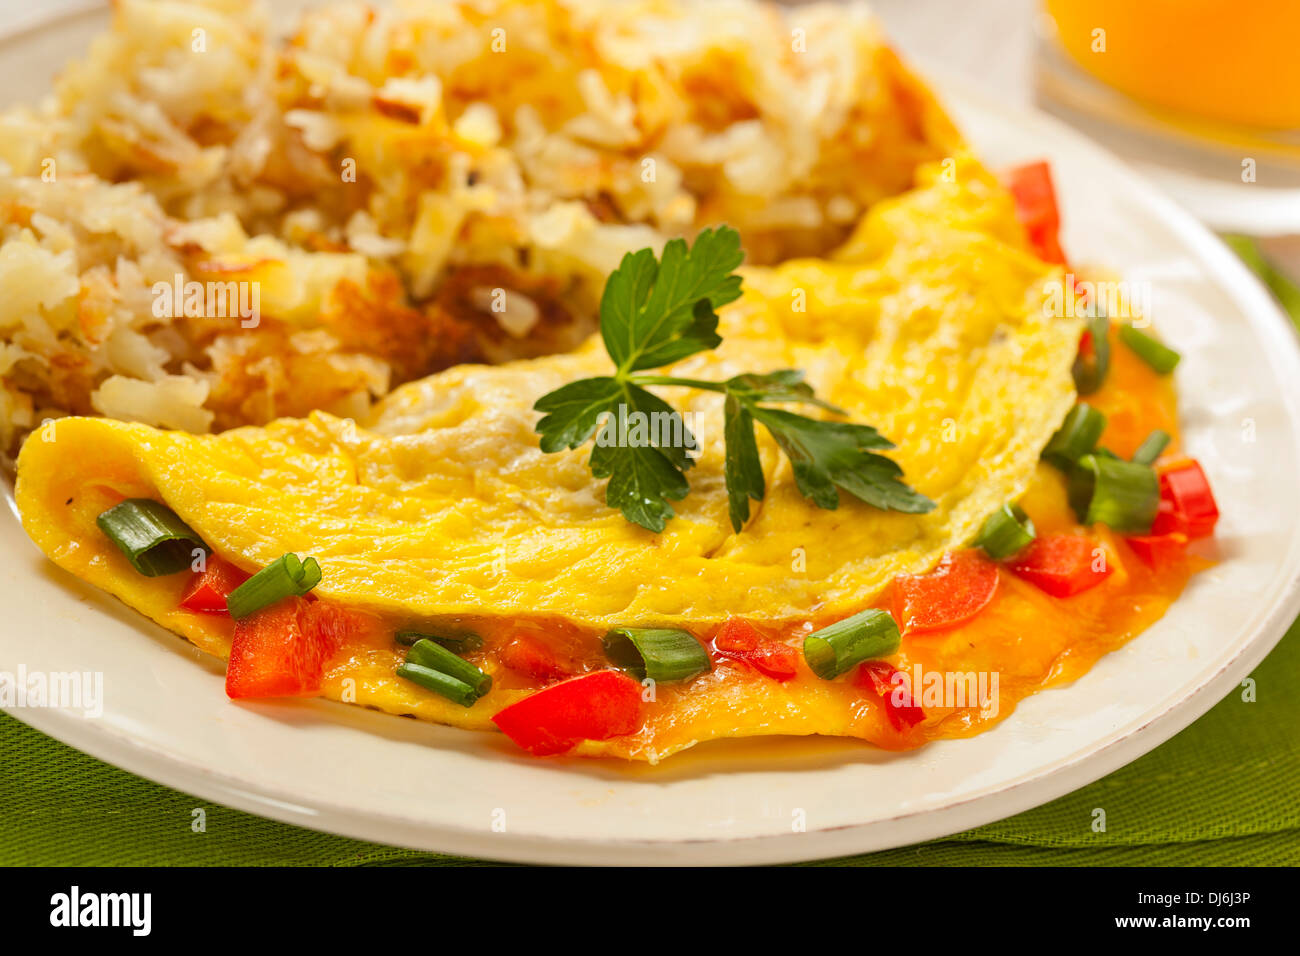 Homemade Organic Vegetarian Cheese Omelette with Onions and Peppers Stock Photo